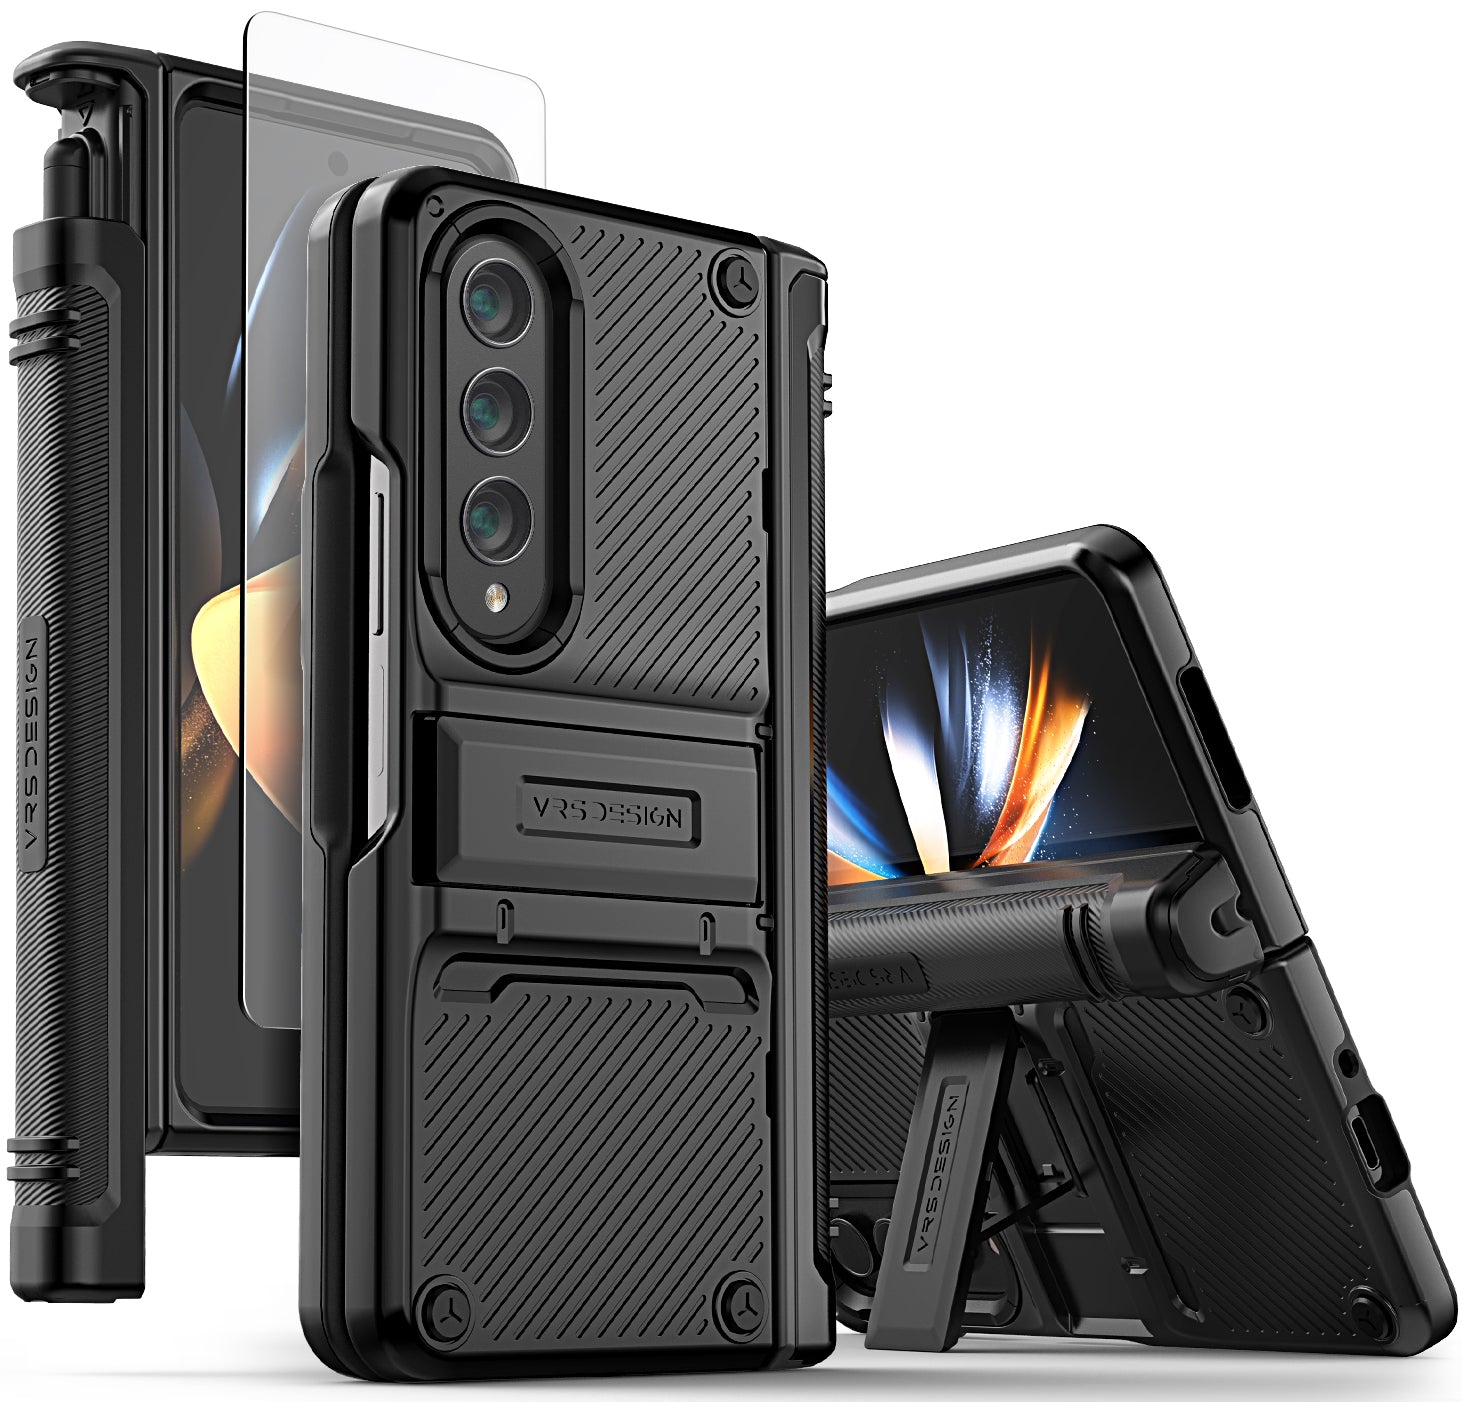 SHIEID Galaxy Z Flip 5 Case - Ultra-Thin Leather with Exclusive Z Ring,  Built-in Screen Protector, Slim and Stylish Phone Case for Samsung Galaxy Z